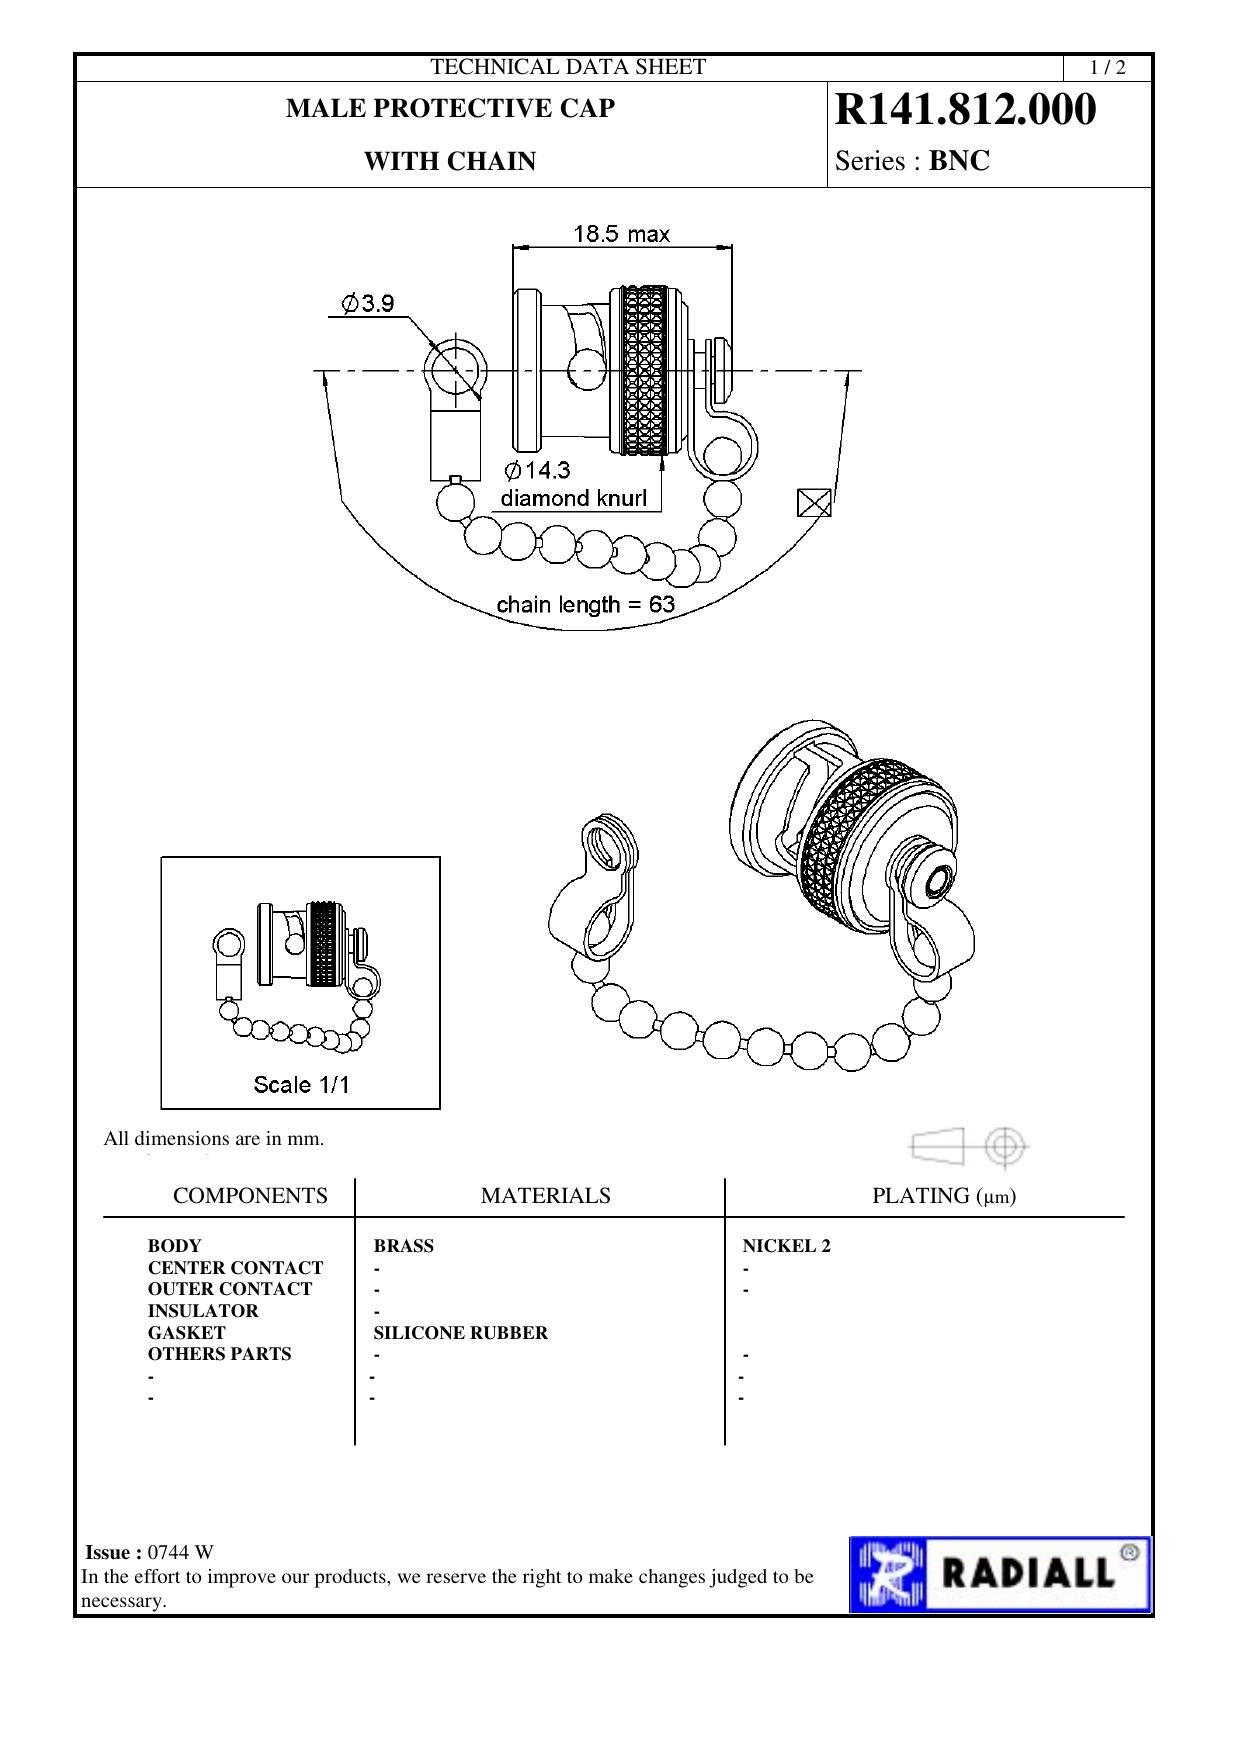 r141812000-series-bnc-male-protective-cap-with-chain.pdf